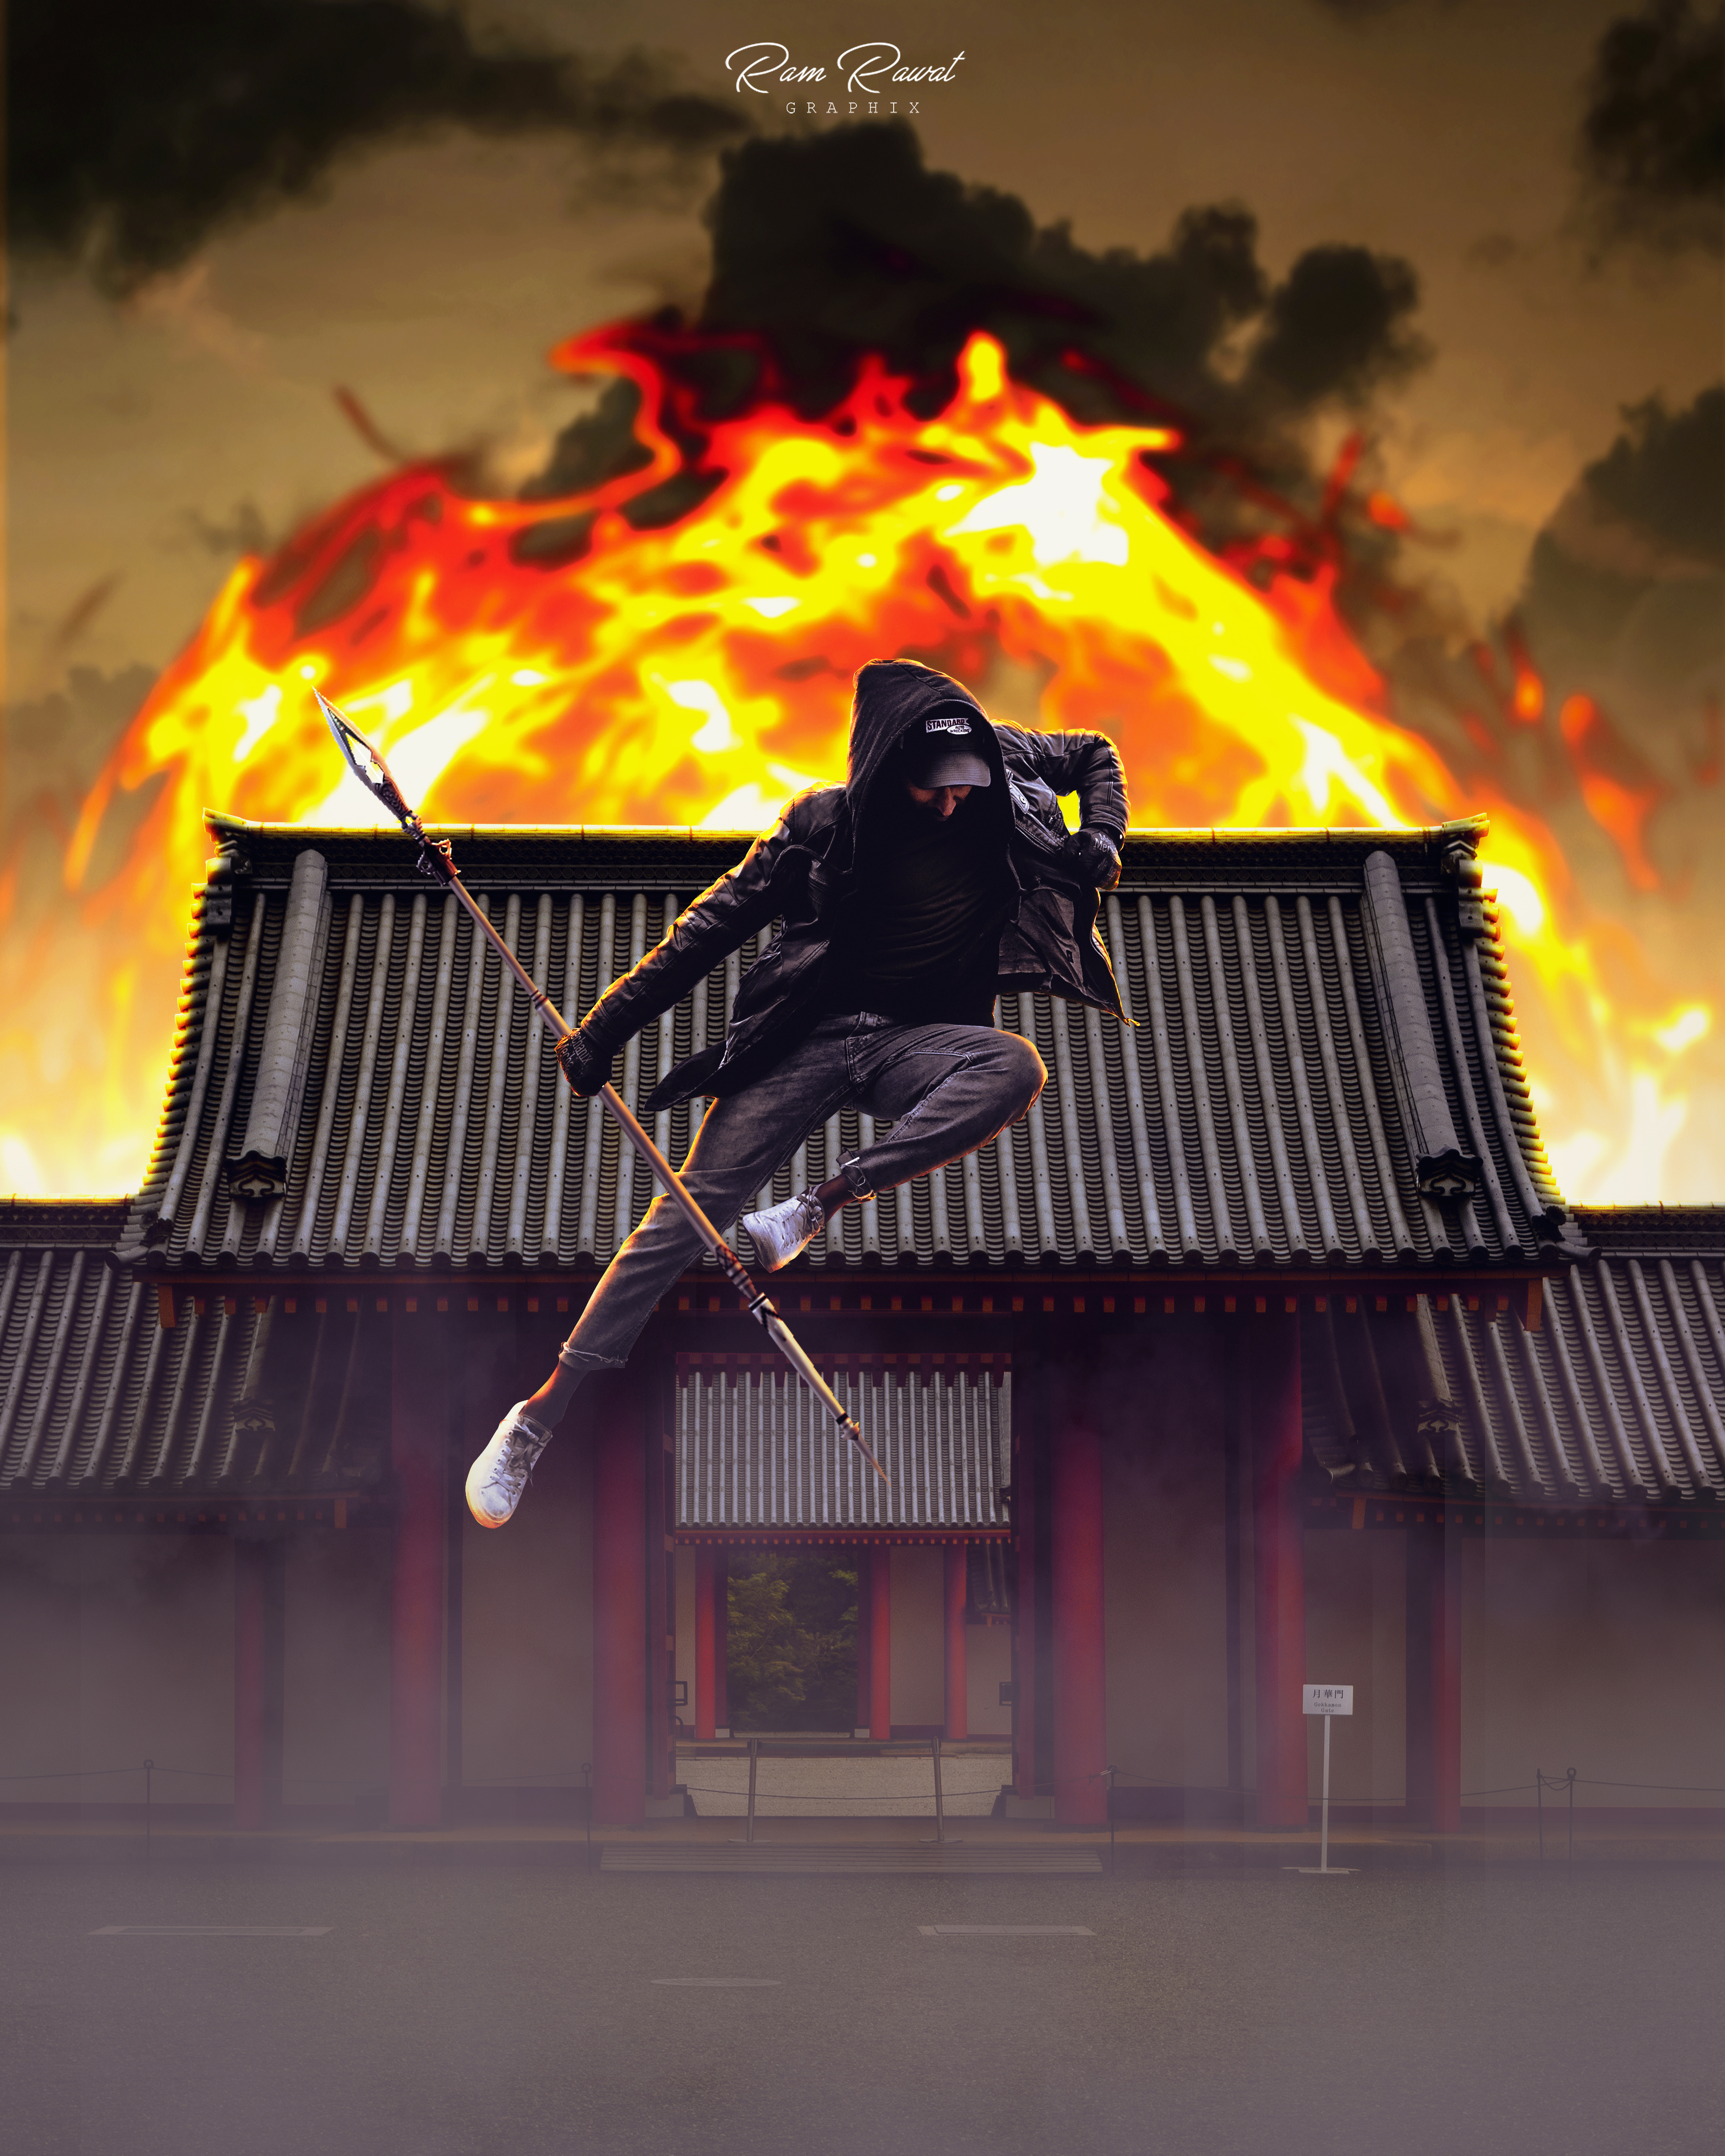 People 3436x4295 photo manipulation photography fire Asia men jumping